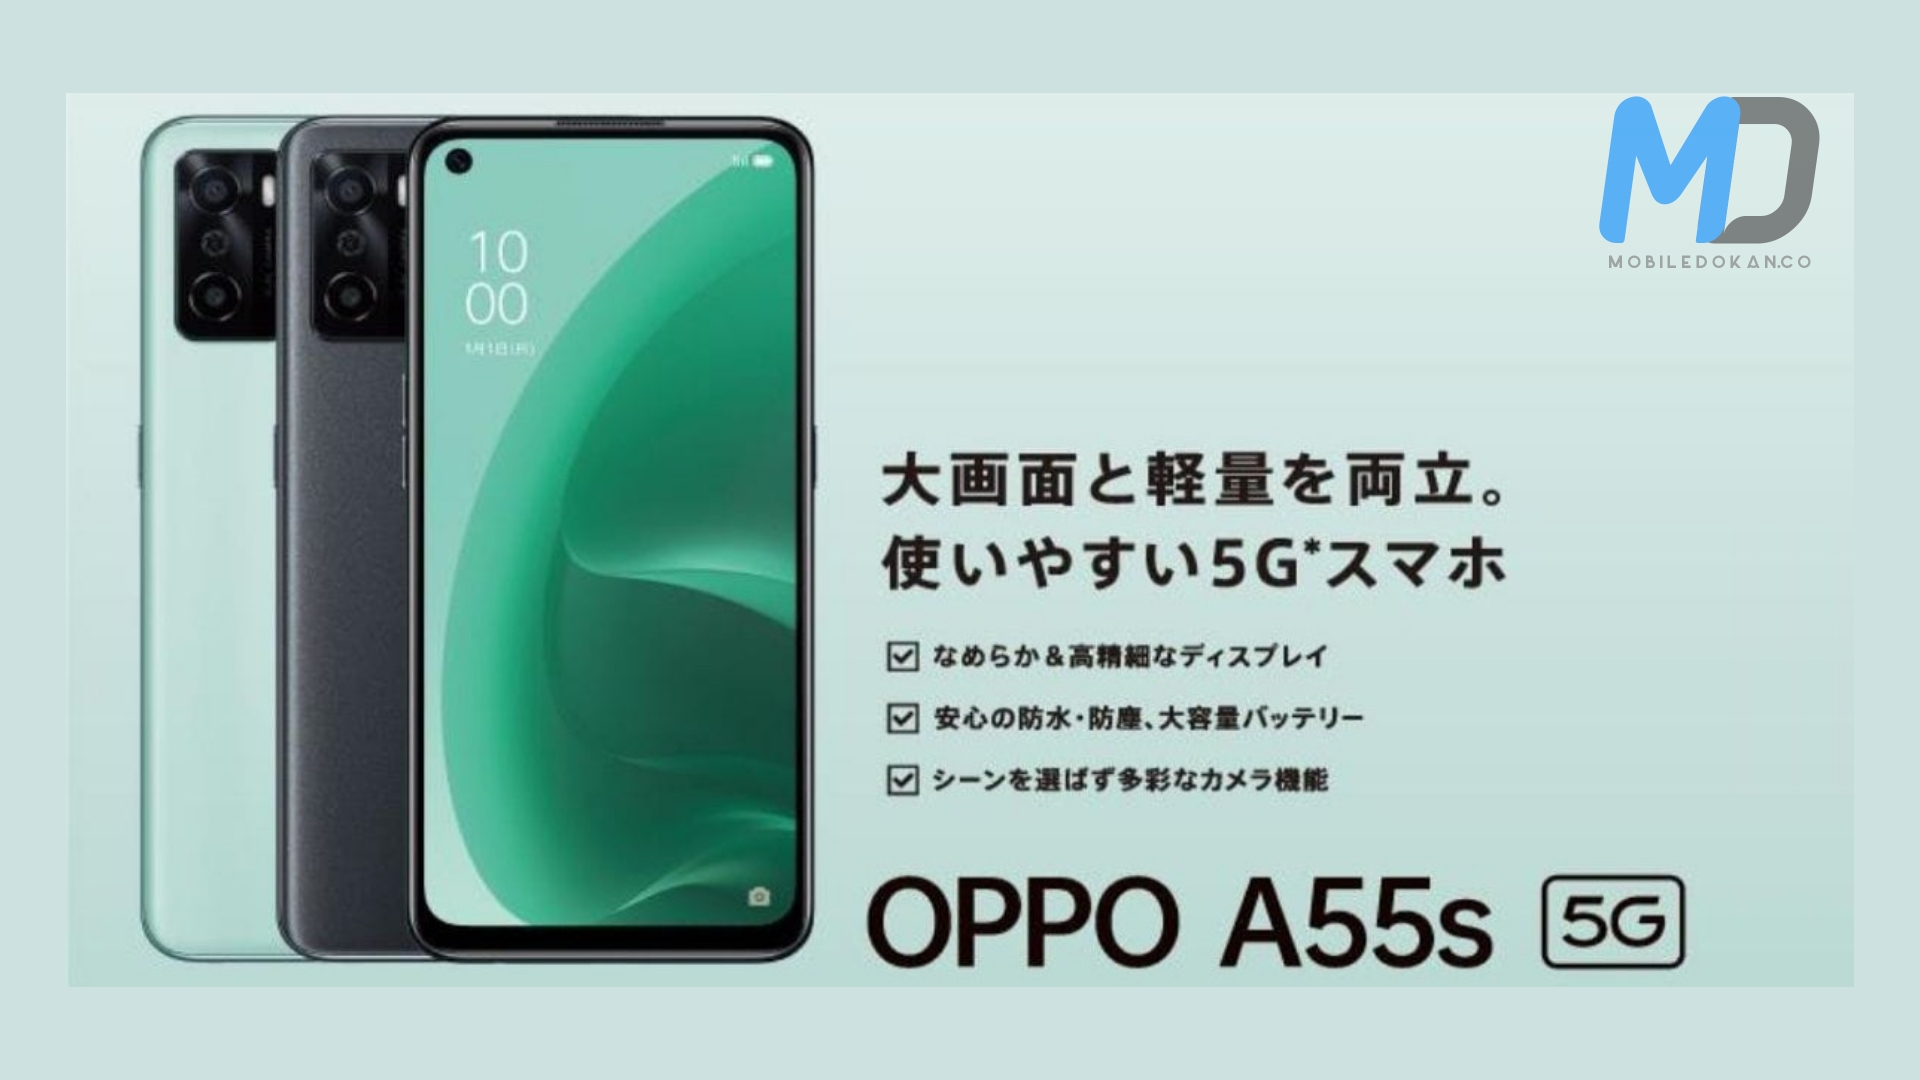 OPPO A55s Launched in Japan, with Snapdragon 480, 90Hz display